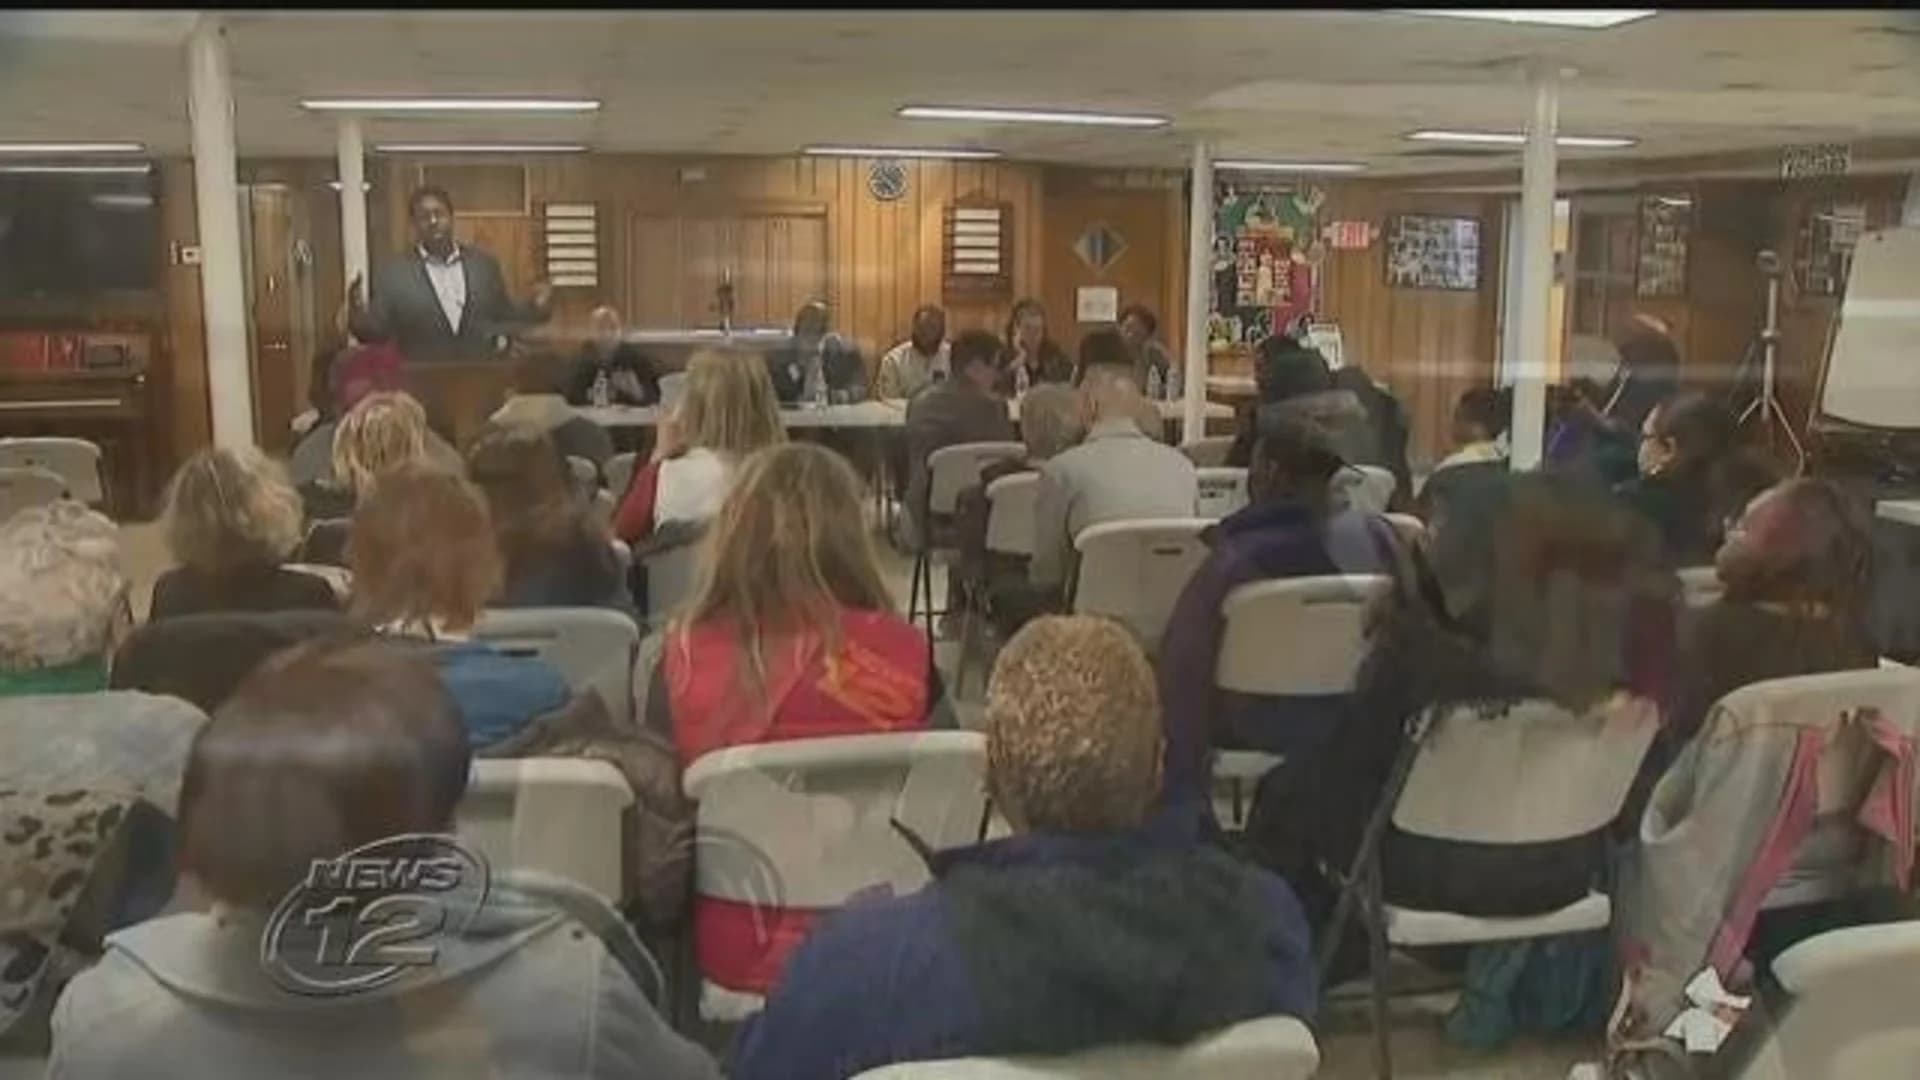 Activists joined by elected officials to discuss police, community relationship